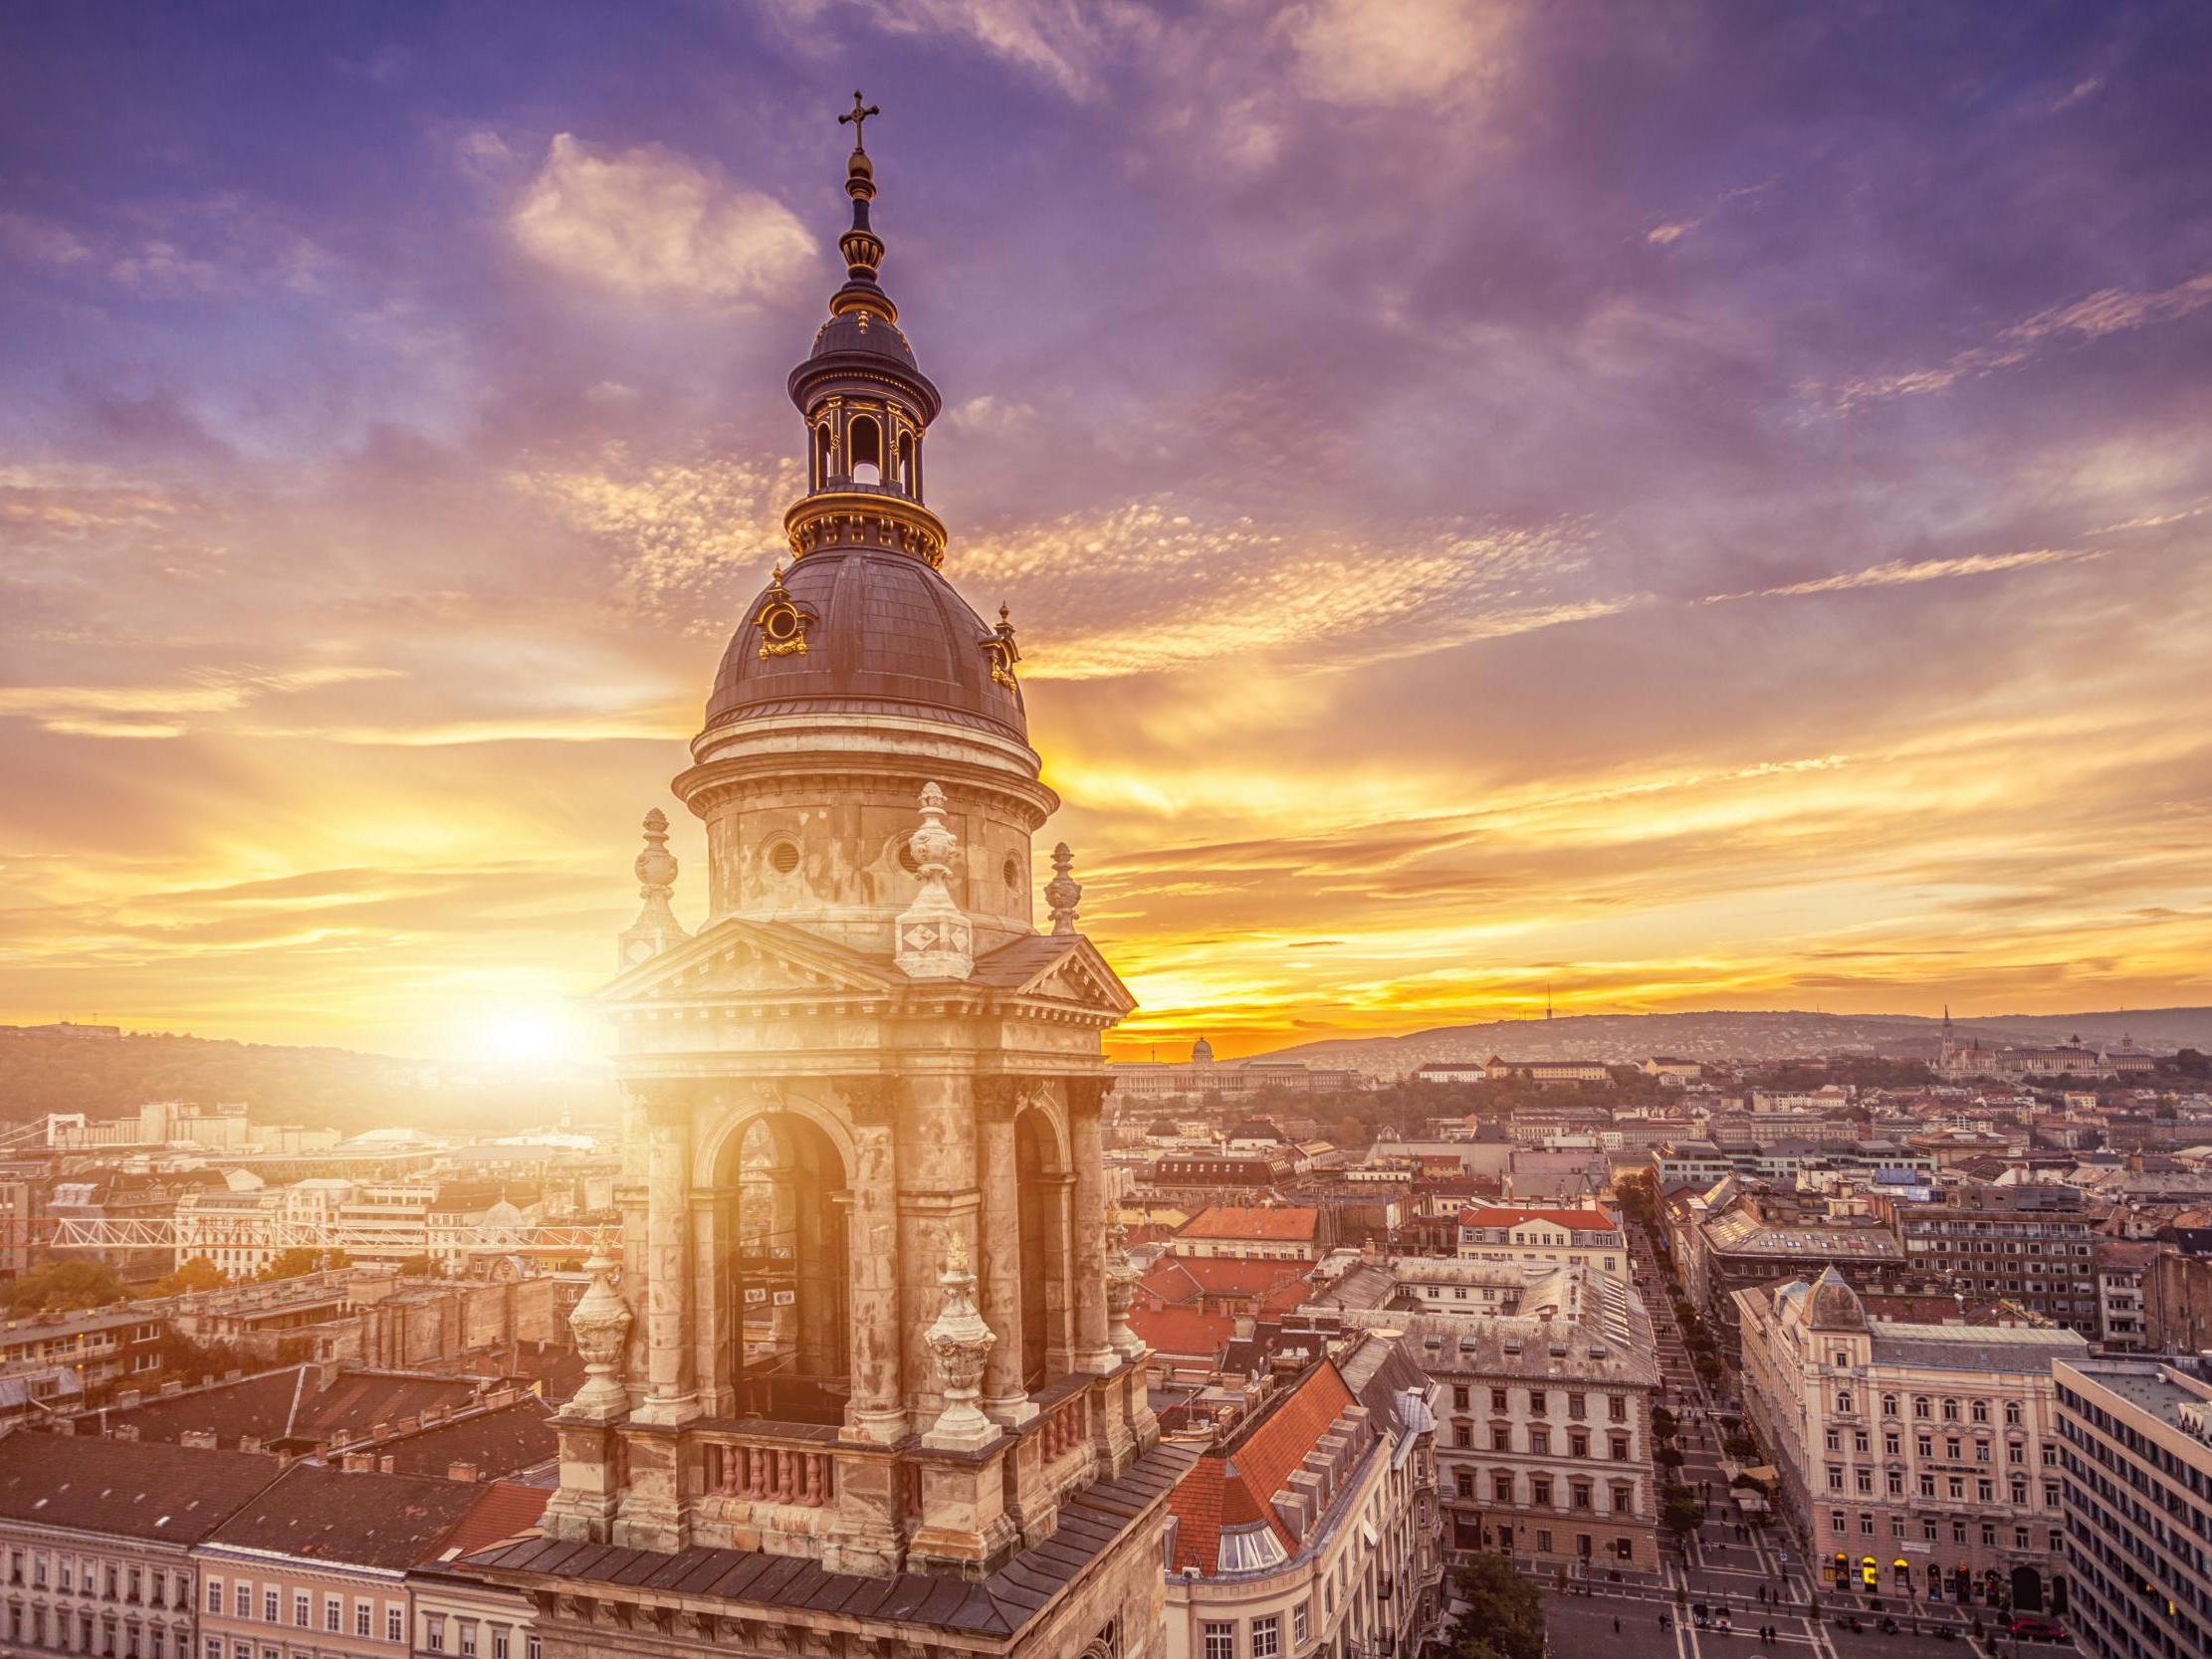 Budapest is a new route from Doncaster-Sheffield this summer